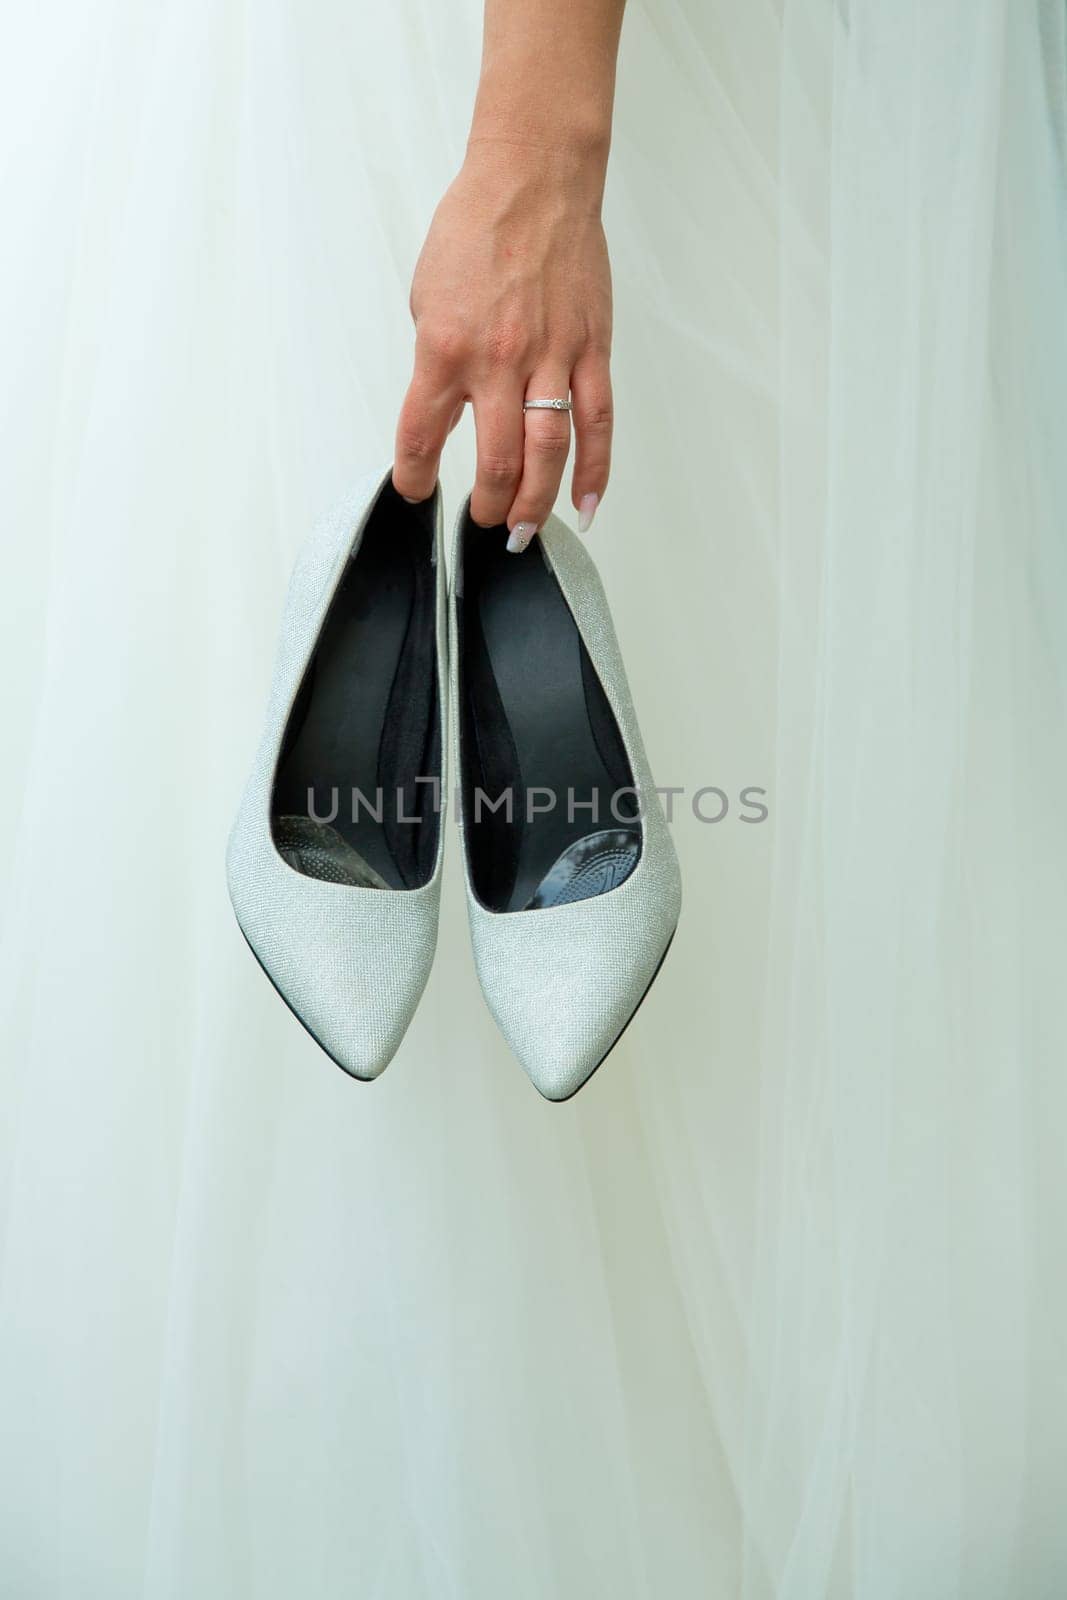 The bride holds wedding shoes in her hands. by leonik